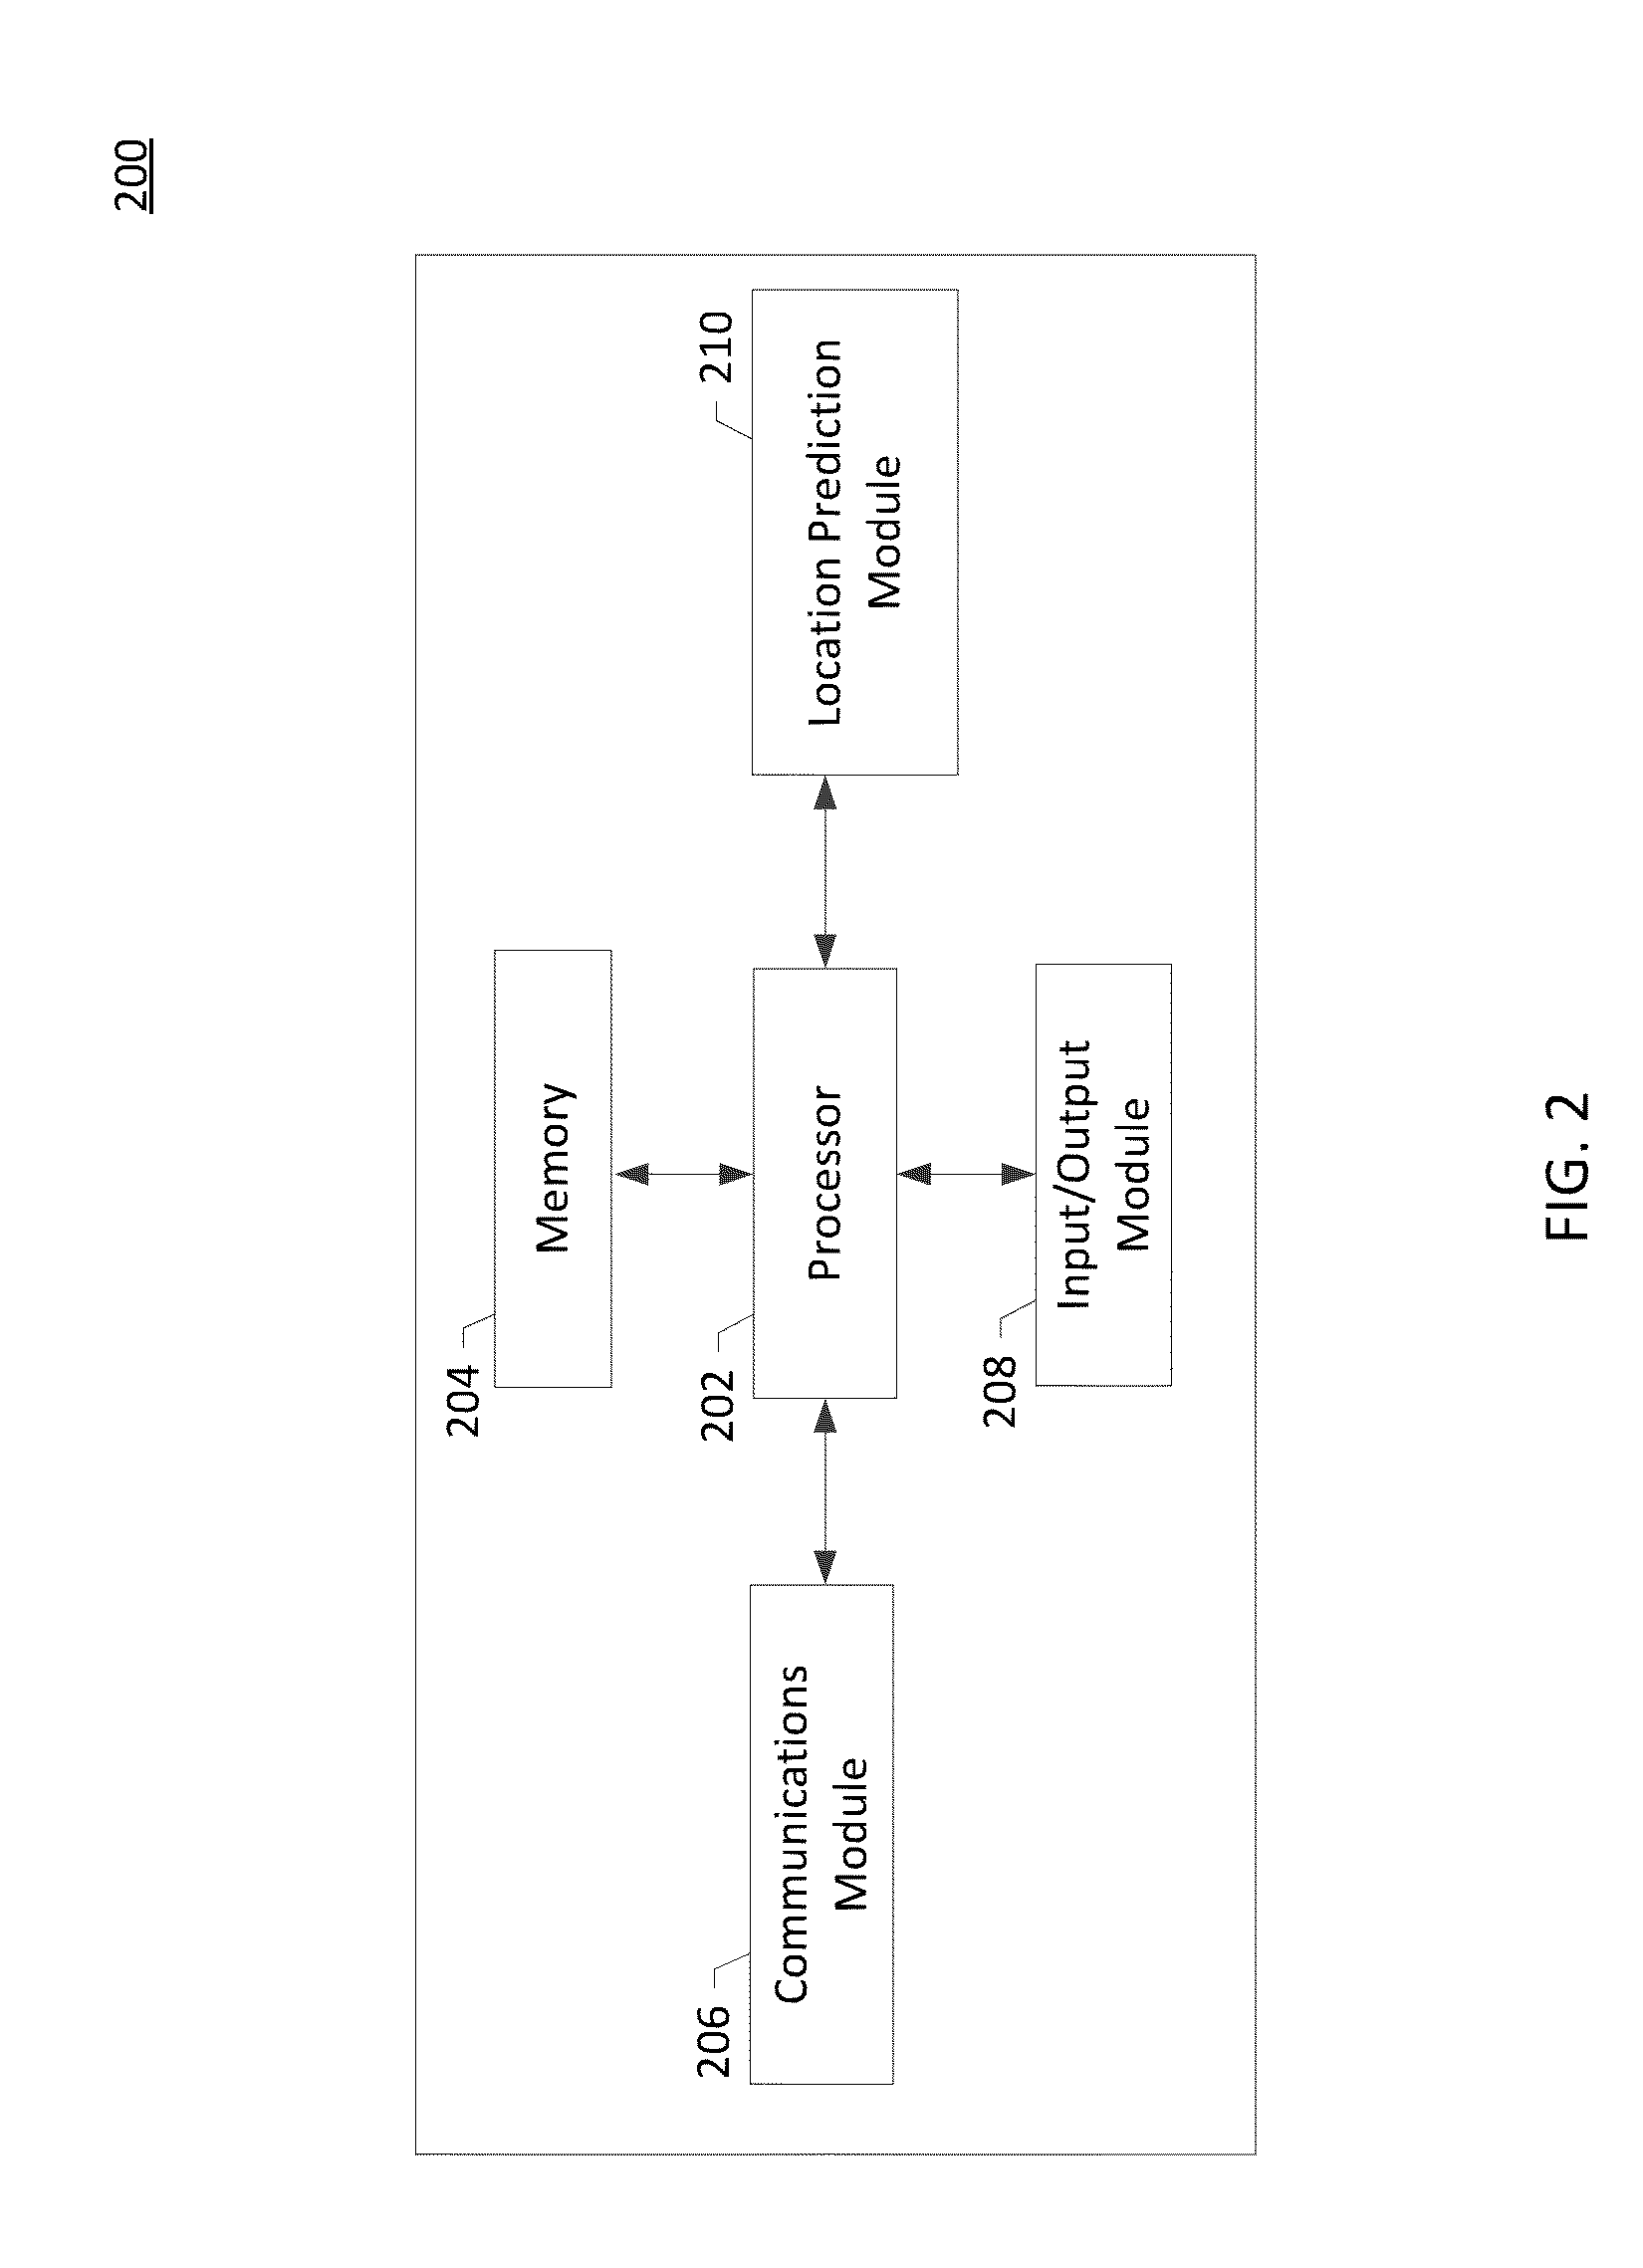 Method and system for determining location of mobile device